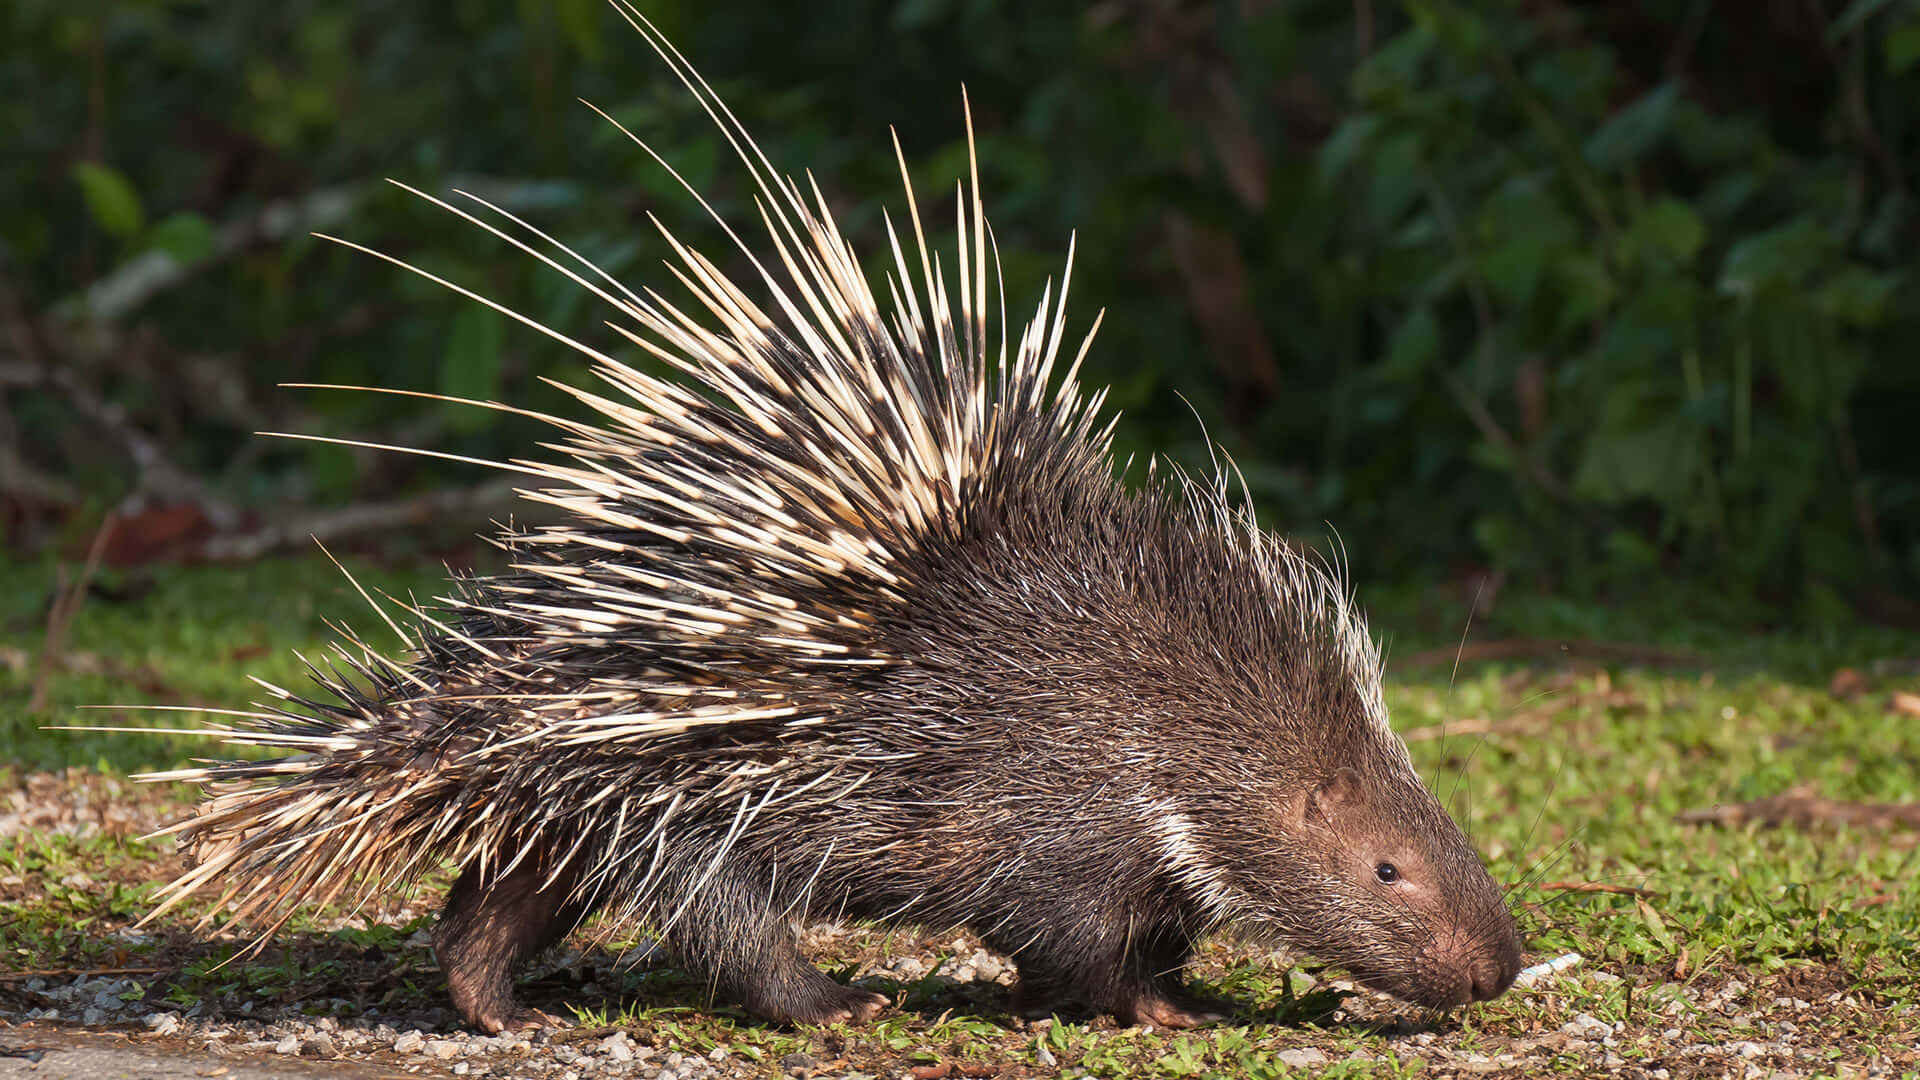 Porcupine Walking On Grassy Ground Picture